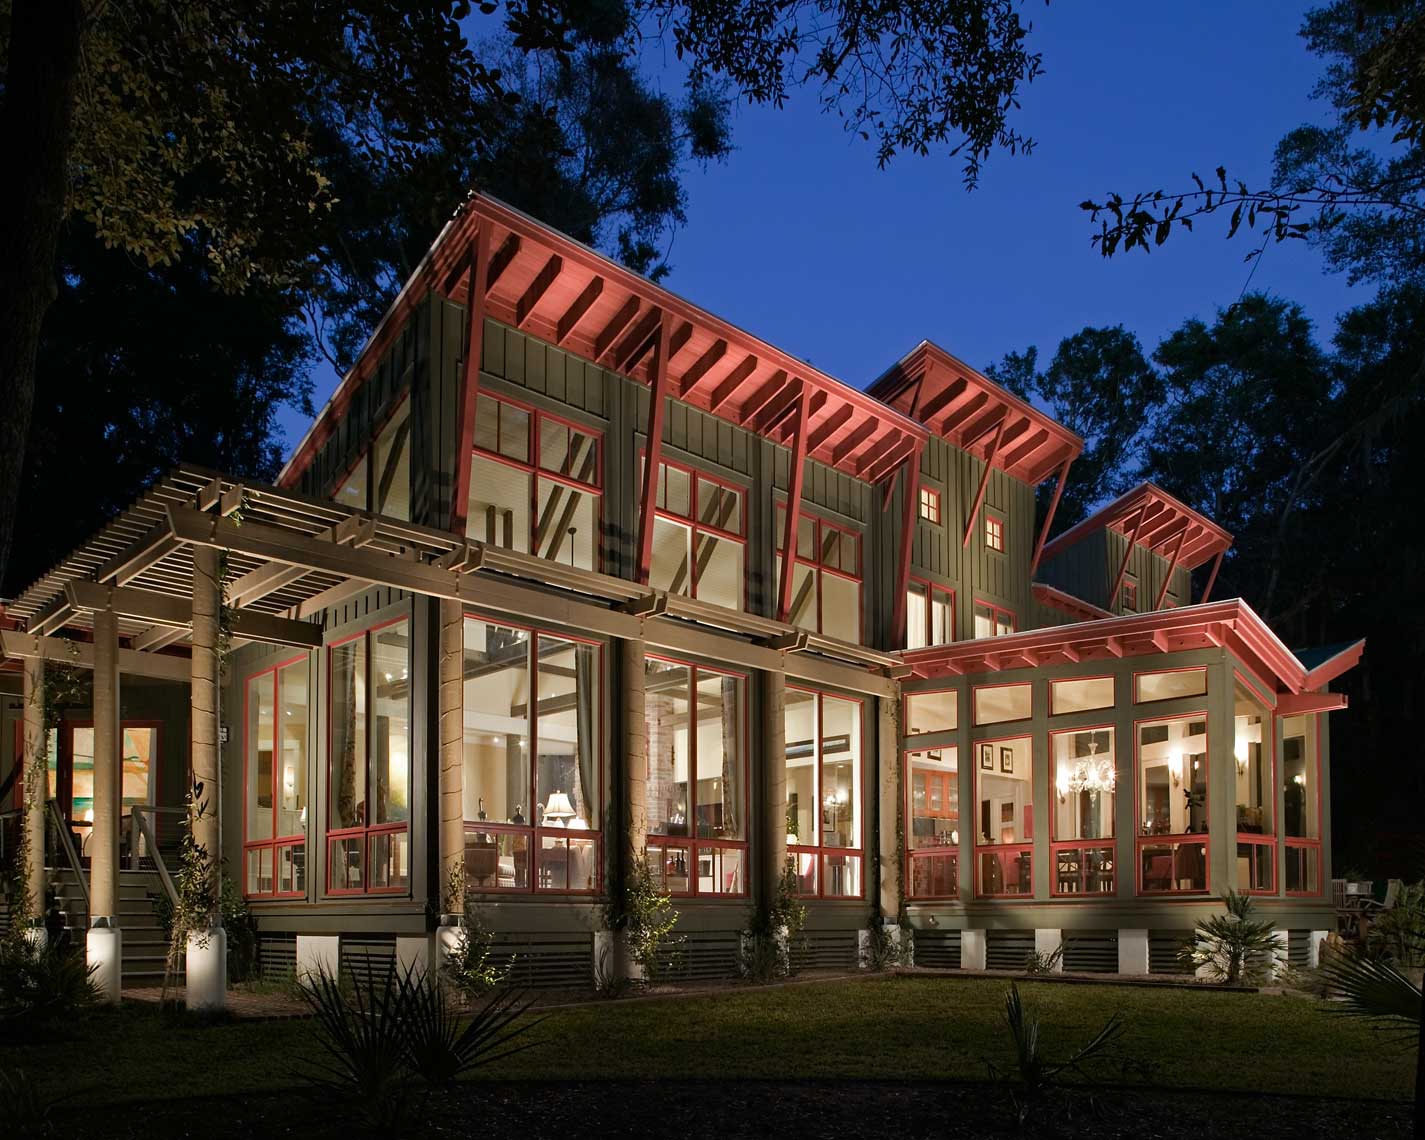 Exterior view of a Spring Island Residence shot at twilight